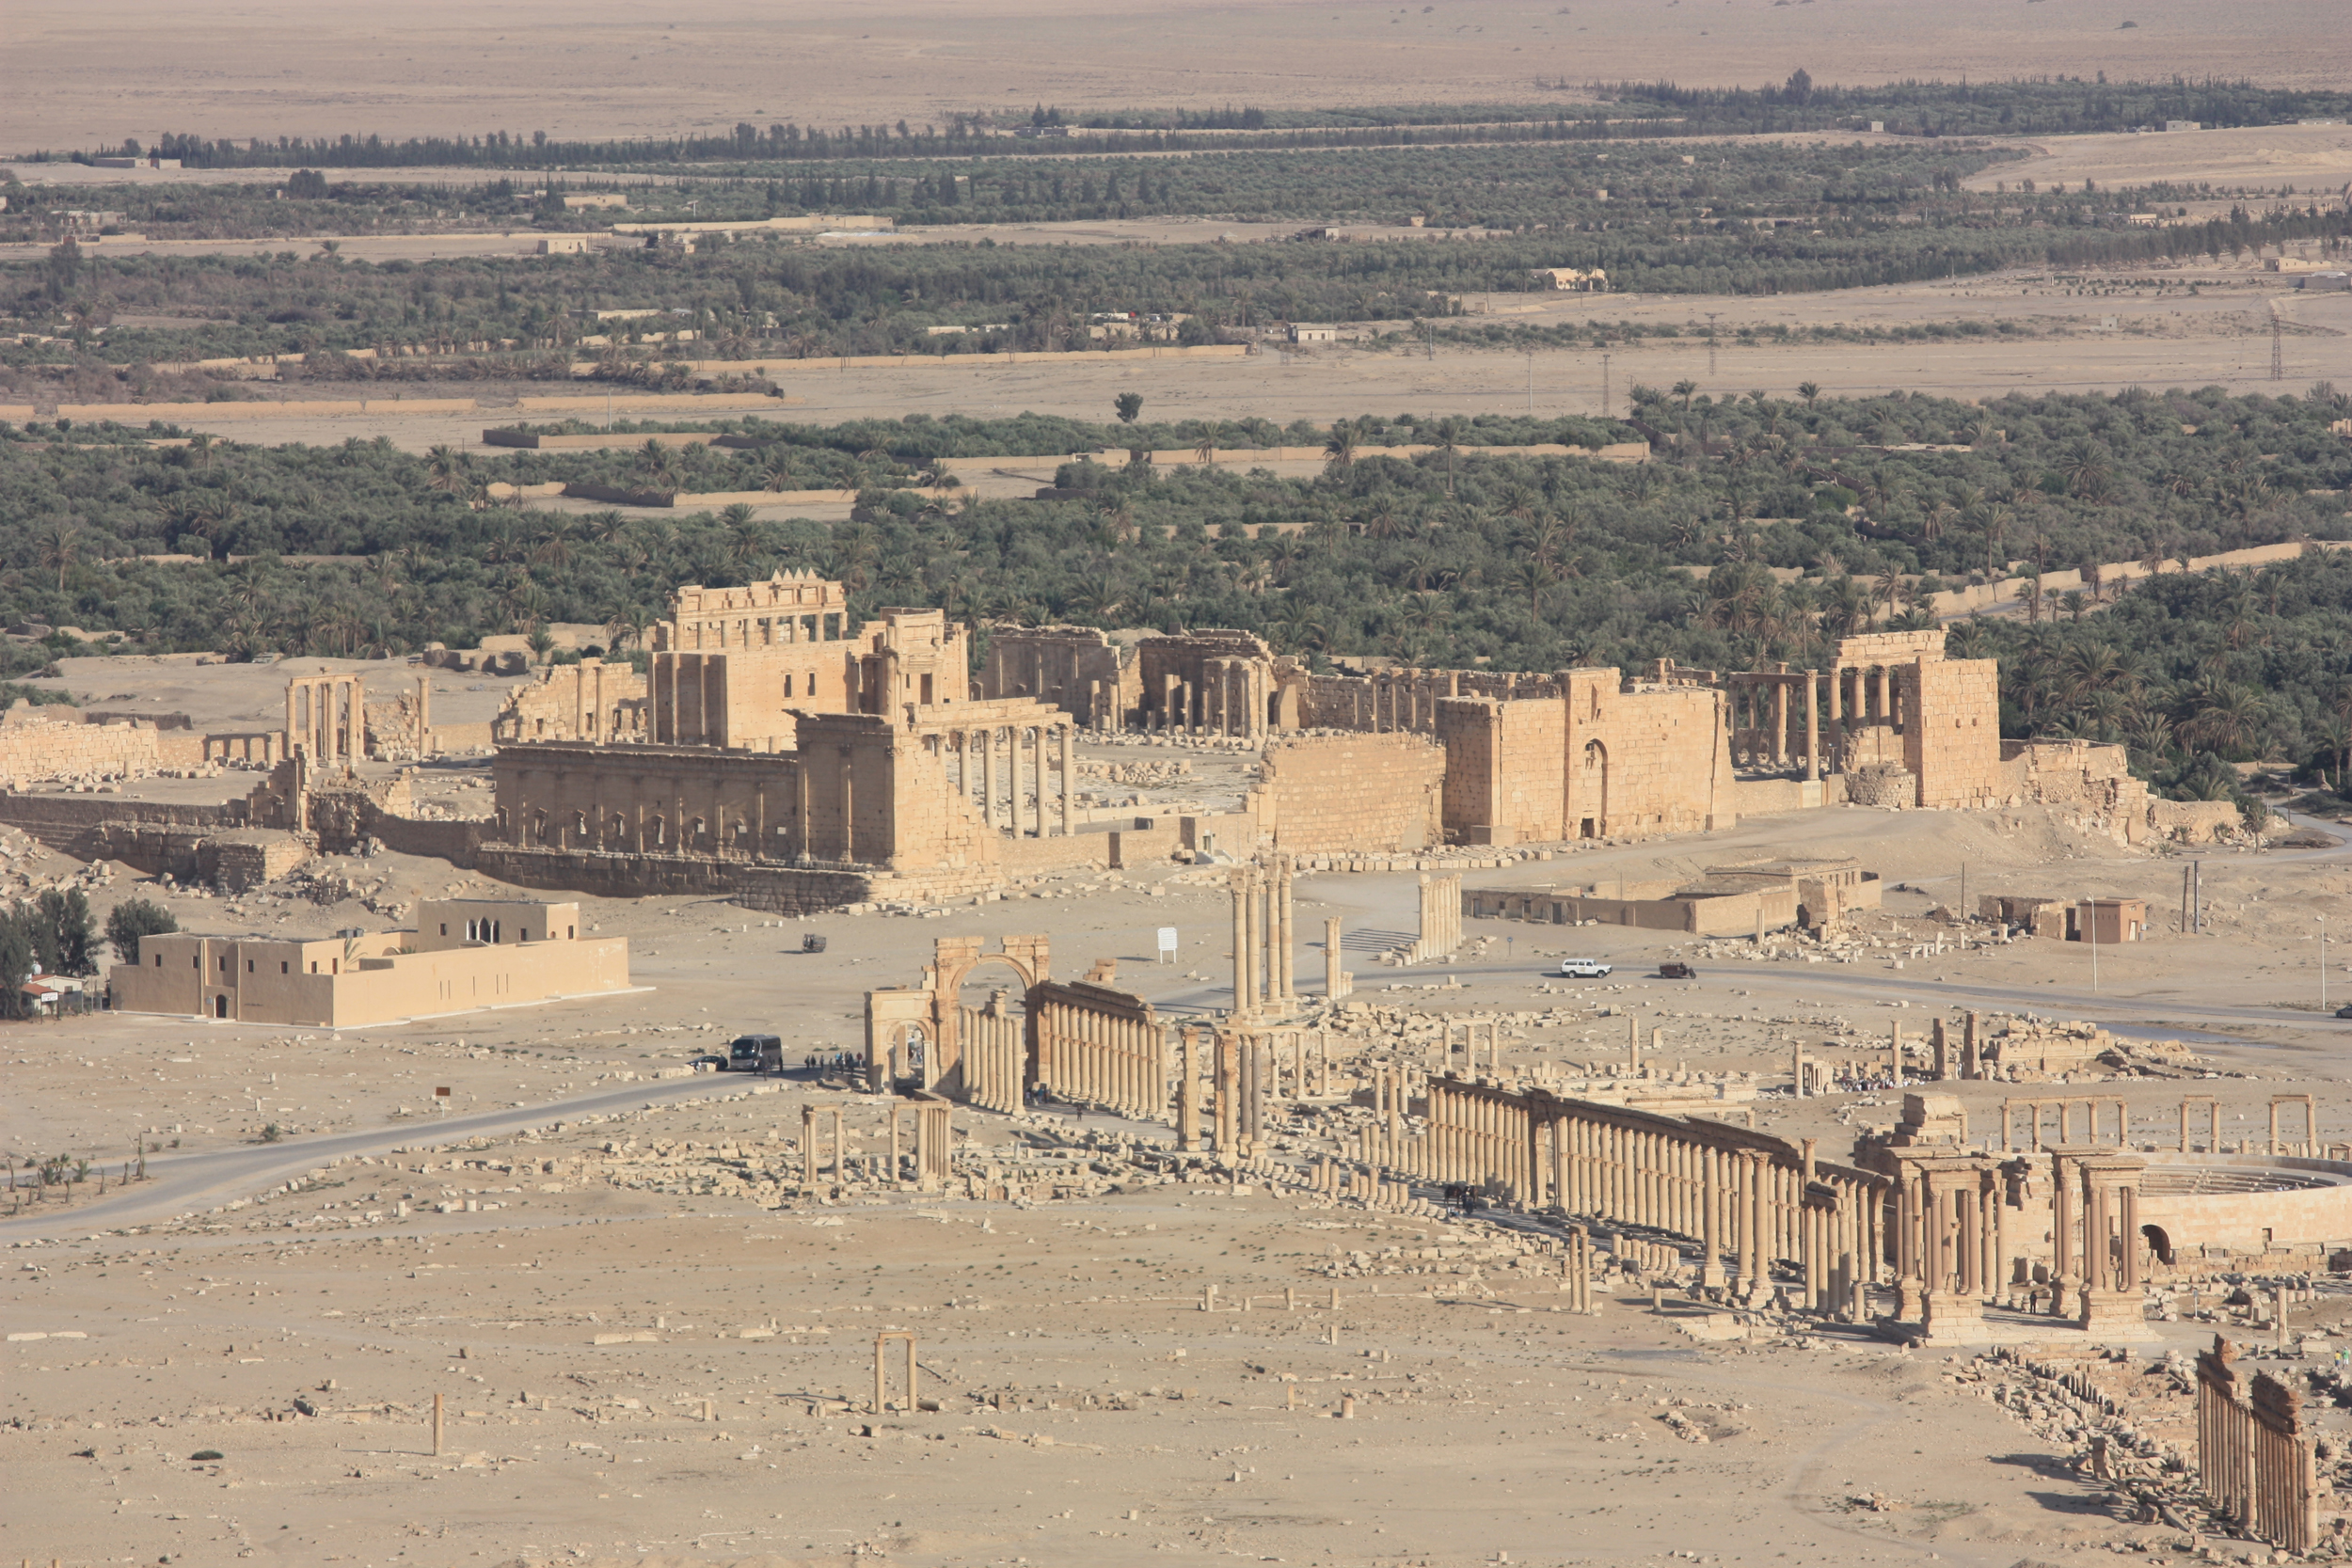 An aerial view of the ancient ruins of Palmyra. Image by Arian Zwegers. This file is licensed under the Creative Commons Attribution 2.0 Generic license.